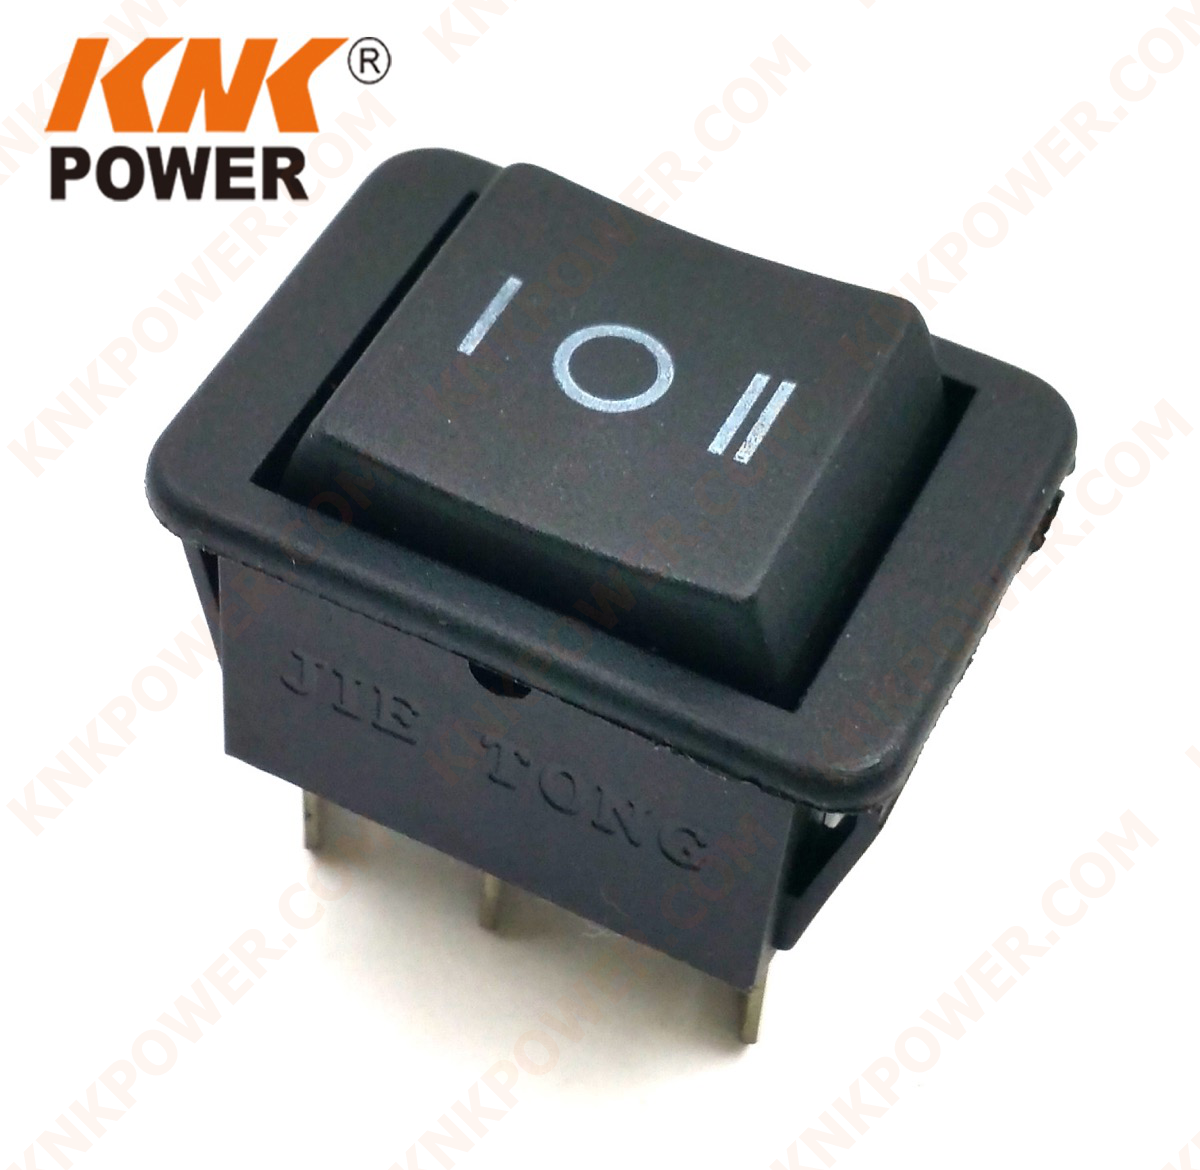 knkpower product image 19185 